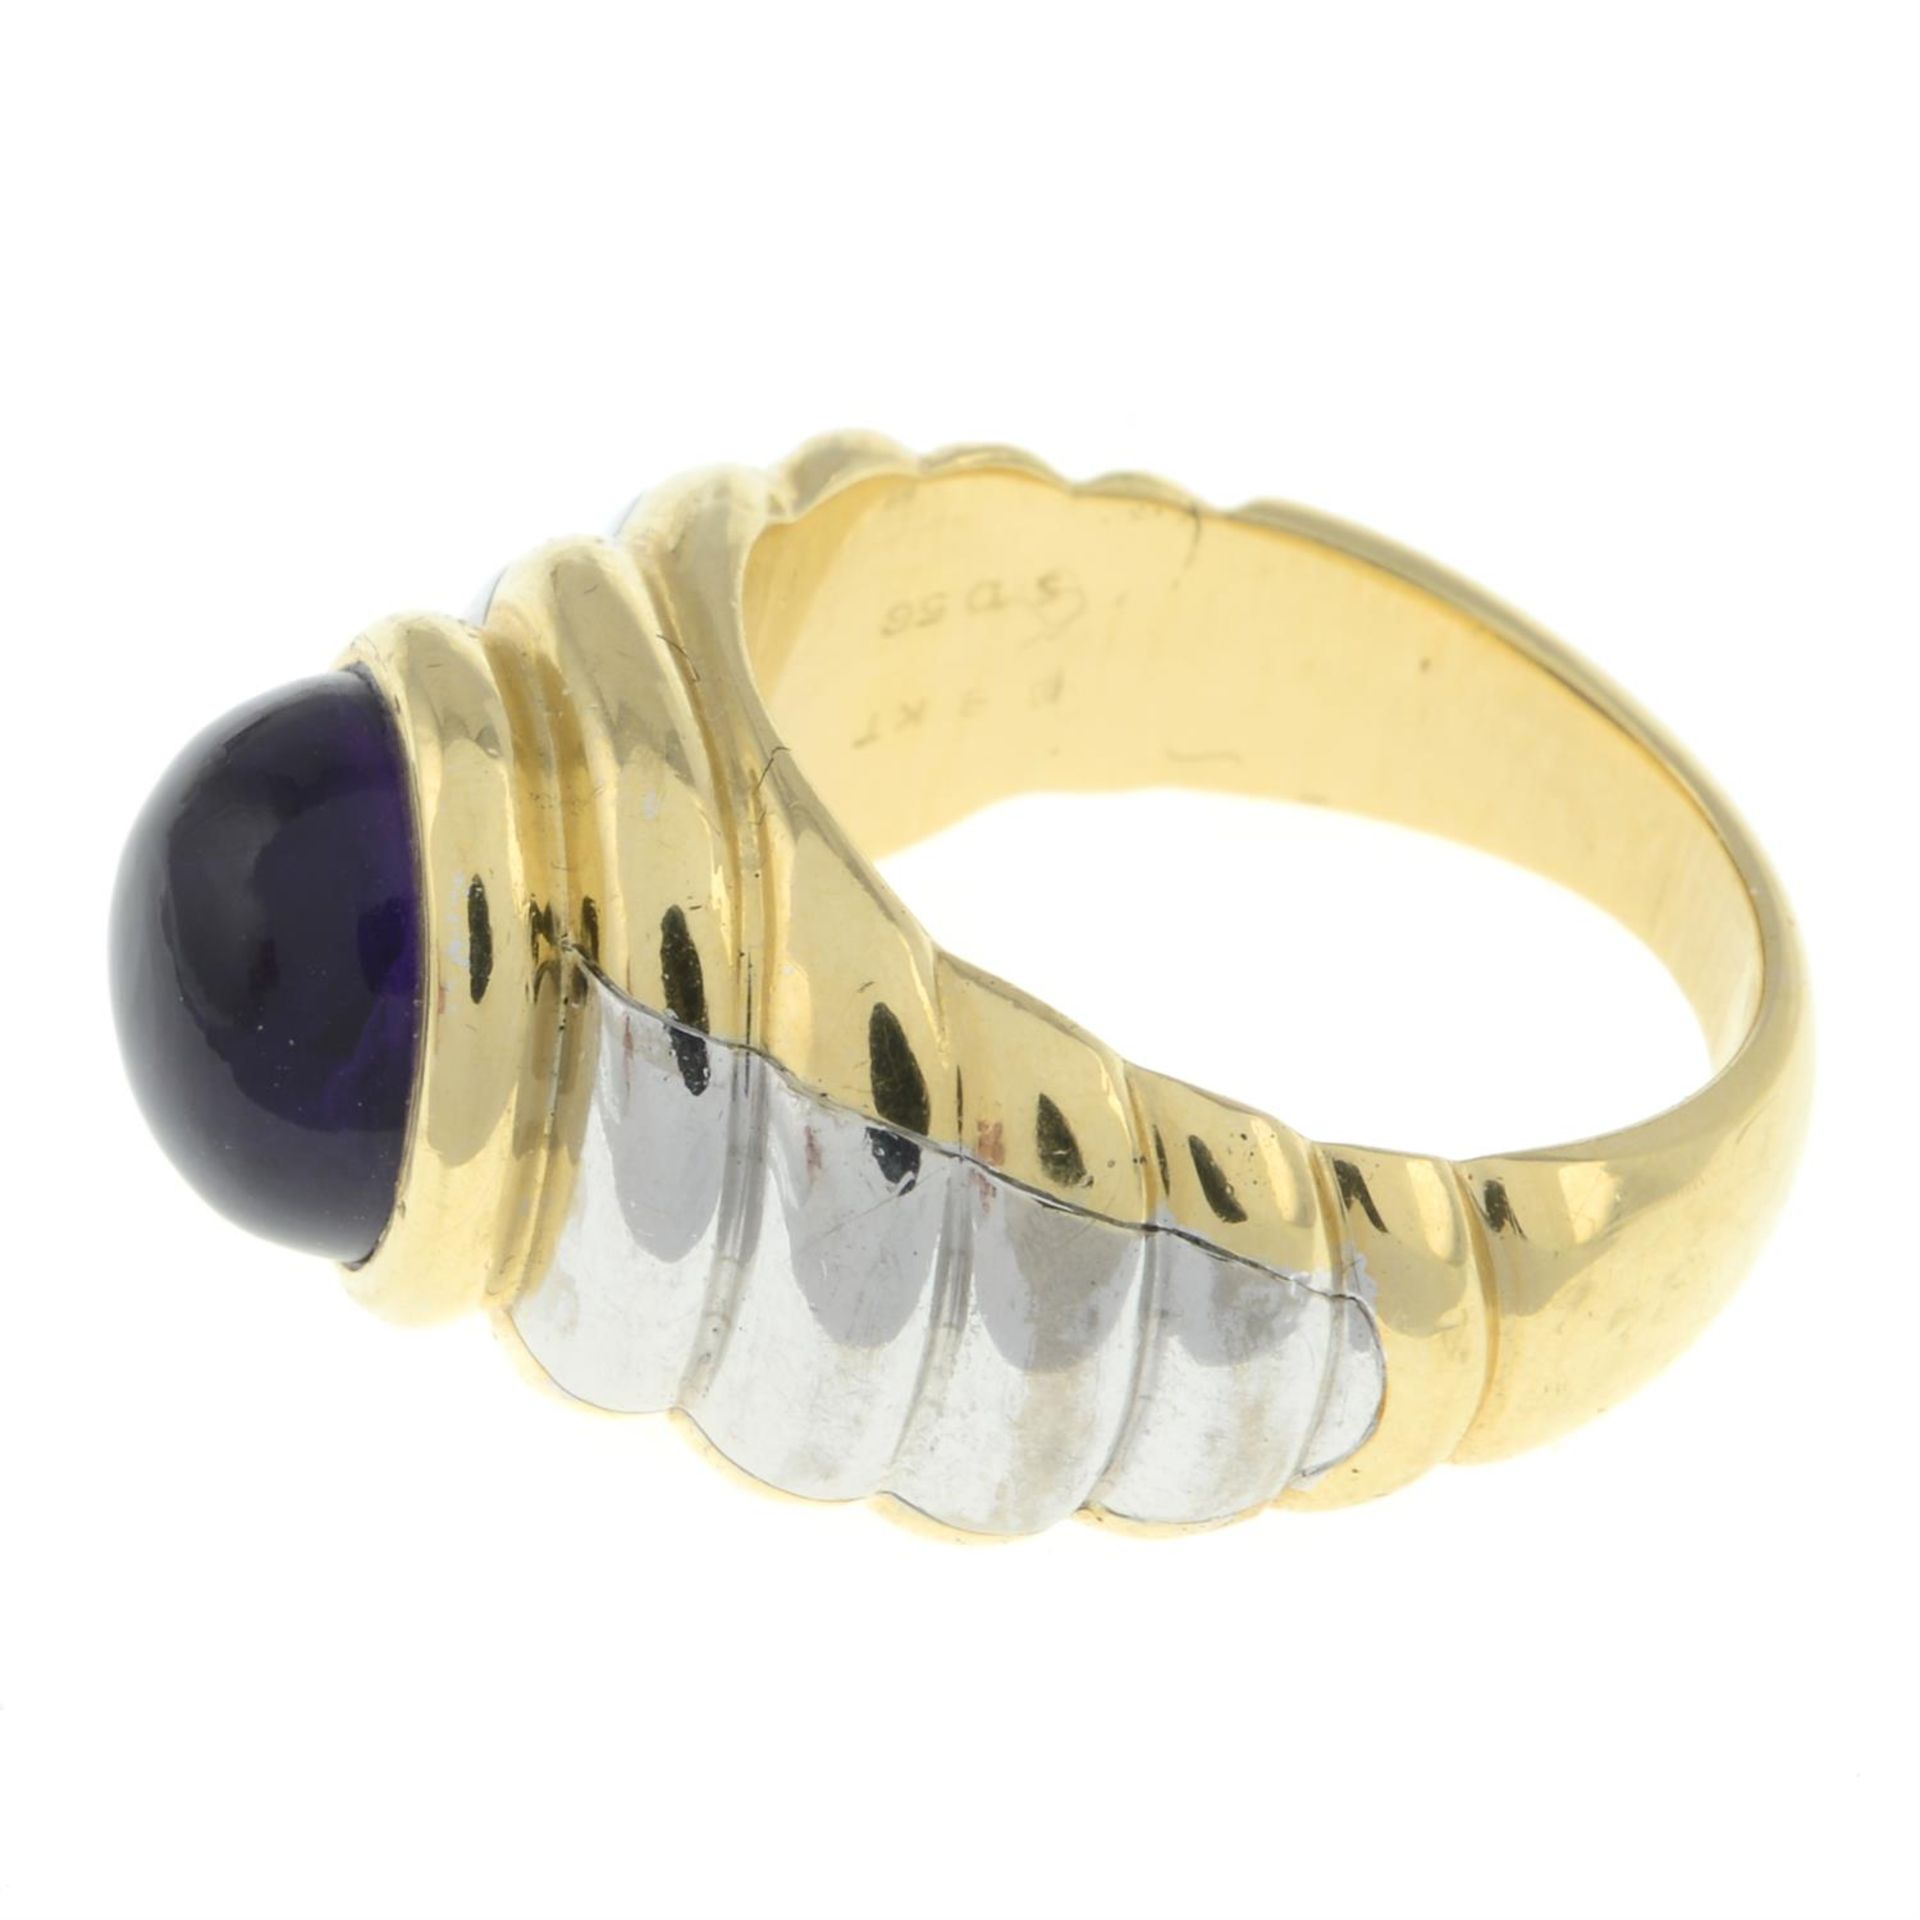 Amethyst ring, by Mauboussin - Image 4 of 5